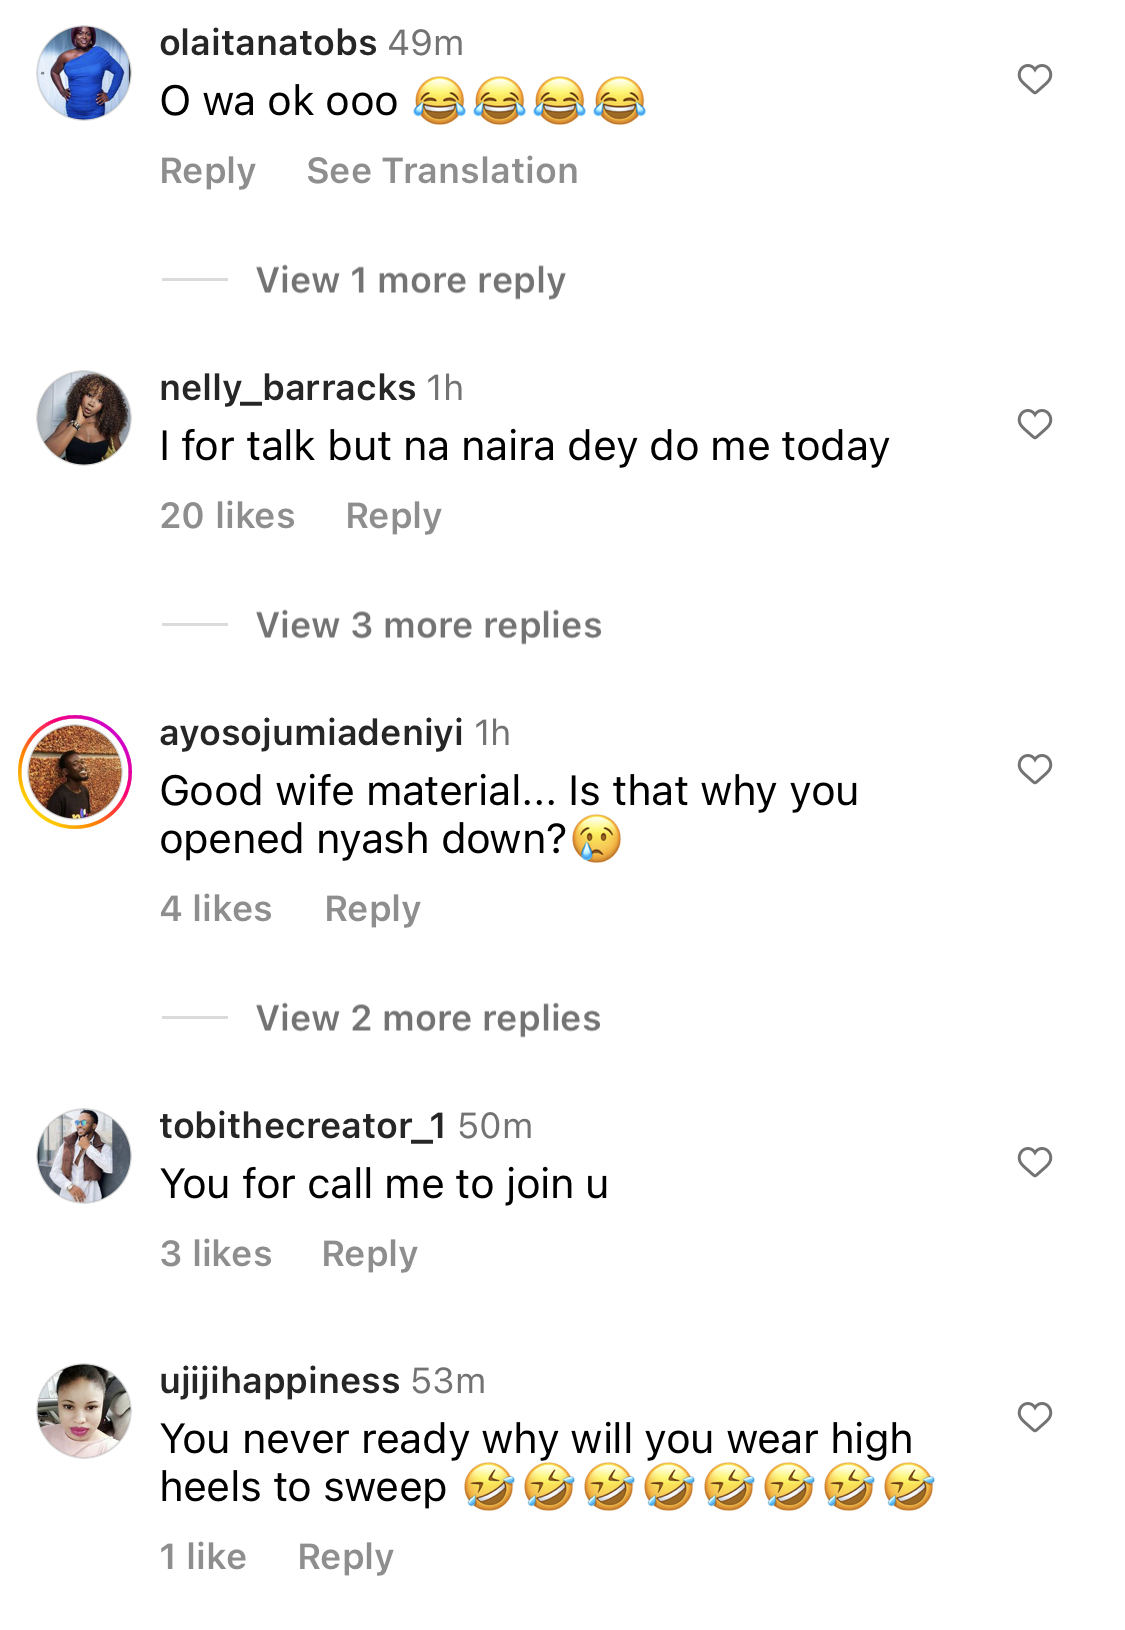 You dey find husband - Fans react as James Brown shows off “wife material” with sweeping skills [video]